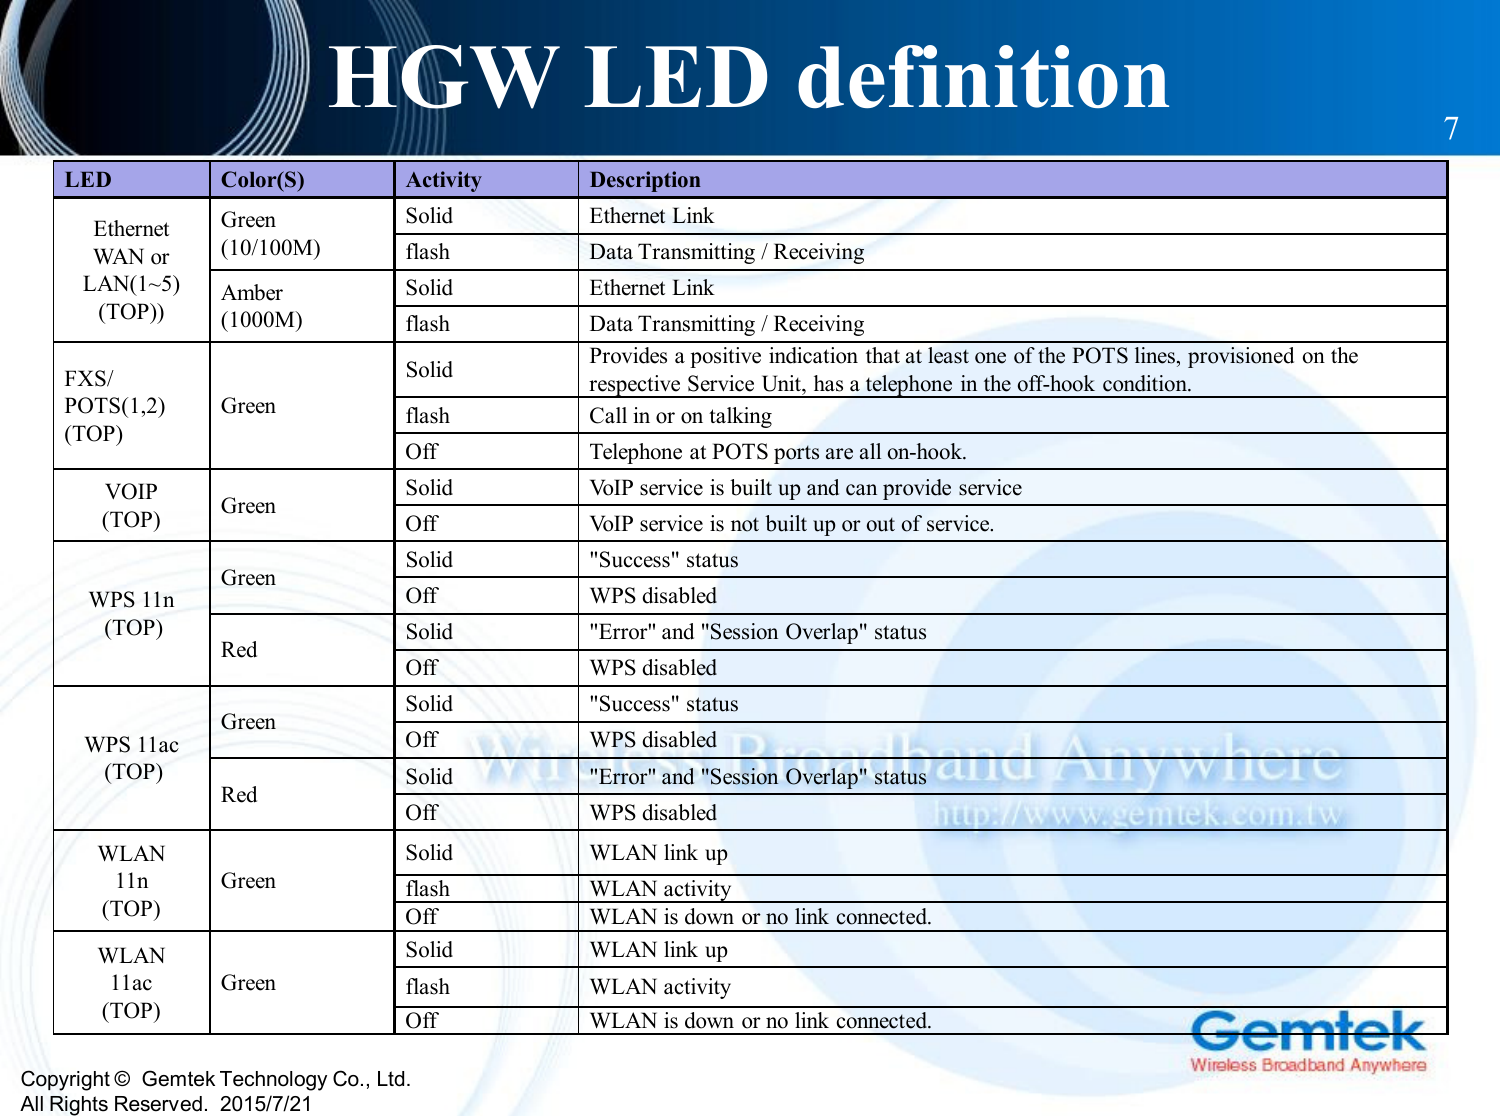 Copyright ©  Gemtek Technology Co., Ltd.All Rights Reserved.  2015/7/21HGW LED definition 7LED Color(S) Activity DescriptionEthernet WAN or LAN(1~5)(TOP))Green(10/100M)Solid  Ethernet Linkflash Data Transmitting / ReceivingAmber(1000M)Solid  Ethernet Linkflash Data Transmitting / ReceivingFXS/ POTS(1,2)(TOP)GreenSolid  Provides a positive indication that at least one of the POTS lines, provisioned on the respective Service Unit, has a telephone in the off-hook condition.flash Call in or on talkingOff Telephone at POTS ports are all on-hook.VOIP(TOP) Green Solid VoIP service is built up and can provide serviceOff VoIP service is not built up or out of service.WPS 11n(TOP)Green Solid &quot;Success&quot; statusOff WPS disabledRed Solid &quot;Error&quot; and &quot;Session Overlap&quot; statusOff WPS disabledWPS 11ac(TOP)Green Solid &quot;Success&quot; statusOff WPS disabledRed Solid &quot;Error&quot; and &quot;Session Overlap&quot; statusOff WPS disabledWLAN11n(TOP)GreenSolid  WLAN link upflash WLAN activityOff WLAN is down or no link connected.WLAN11ac(TOP)GreenSolid  WLAN link upflash WLAN activityOff WLAN is down or no link connected.